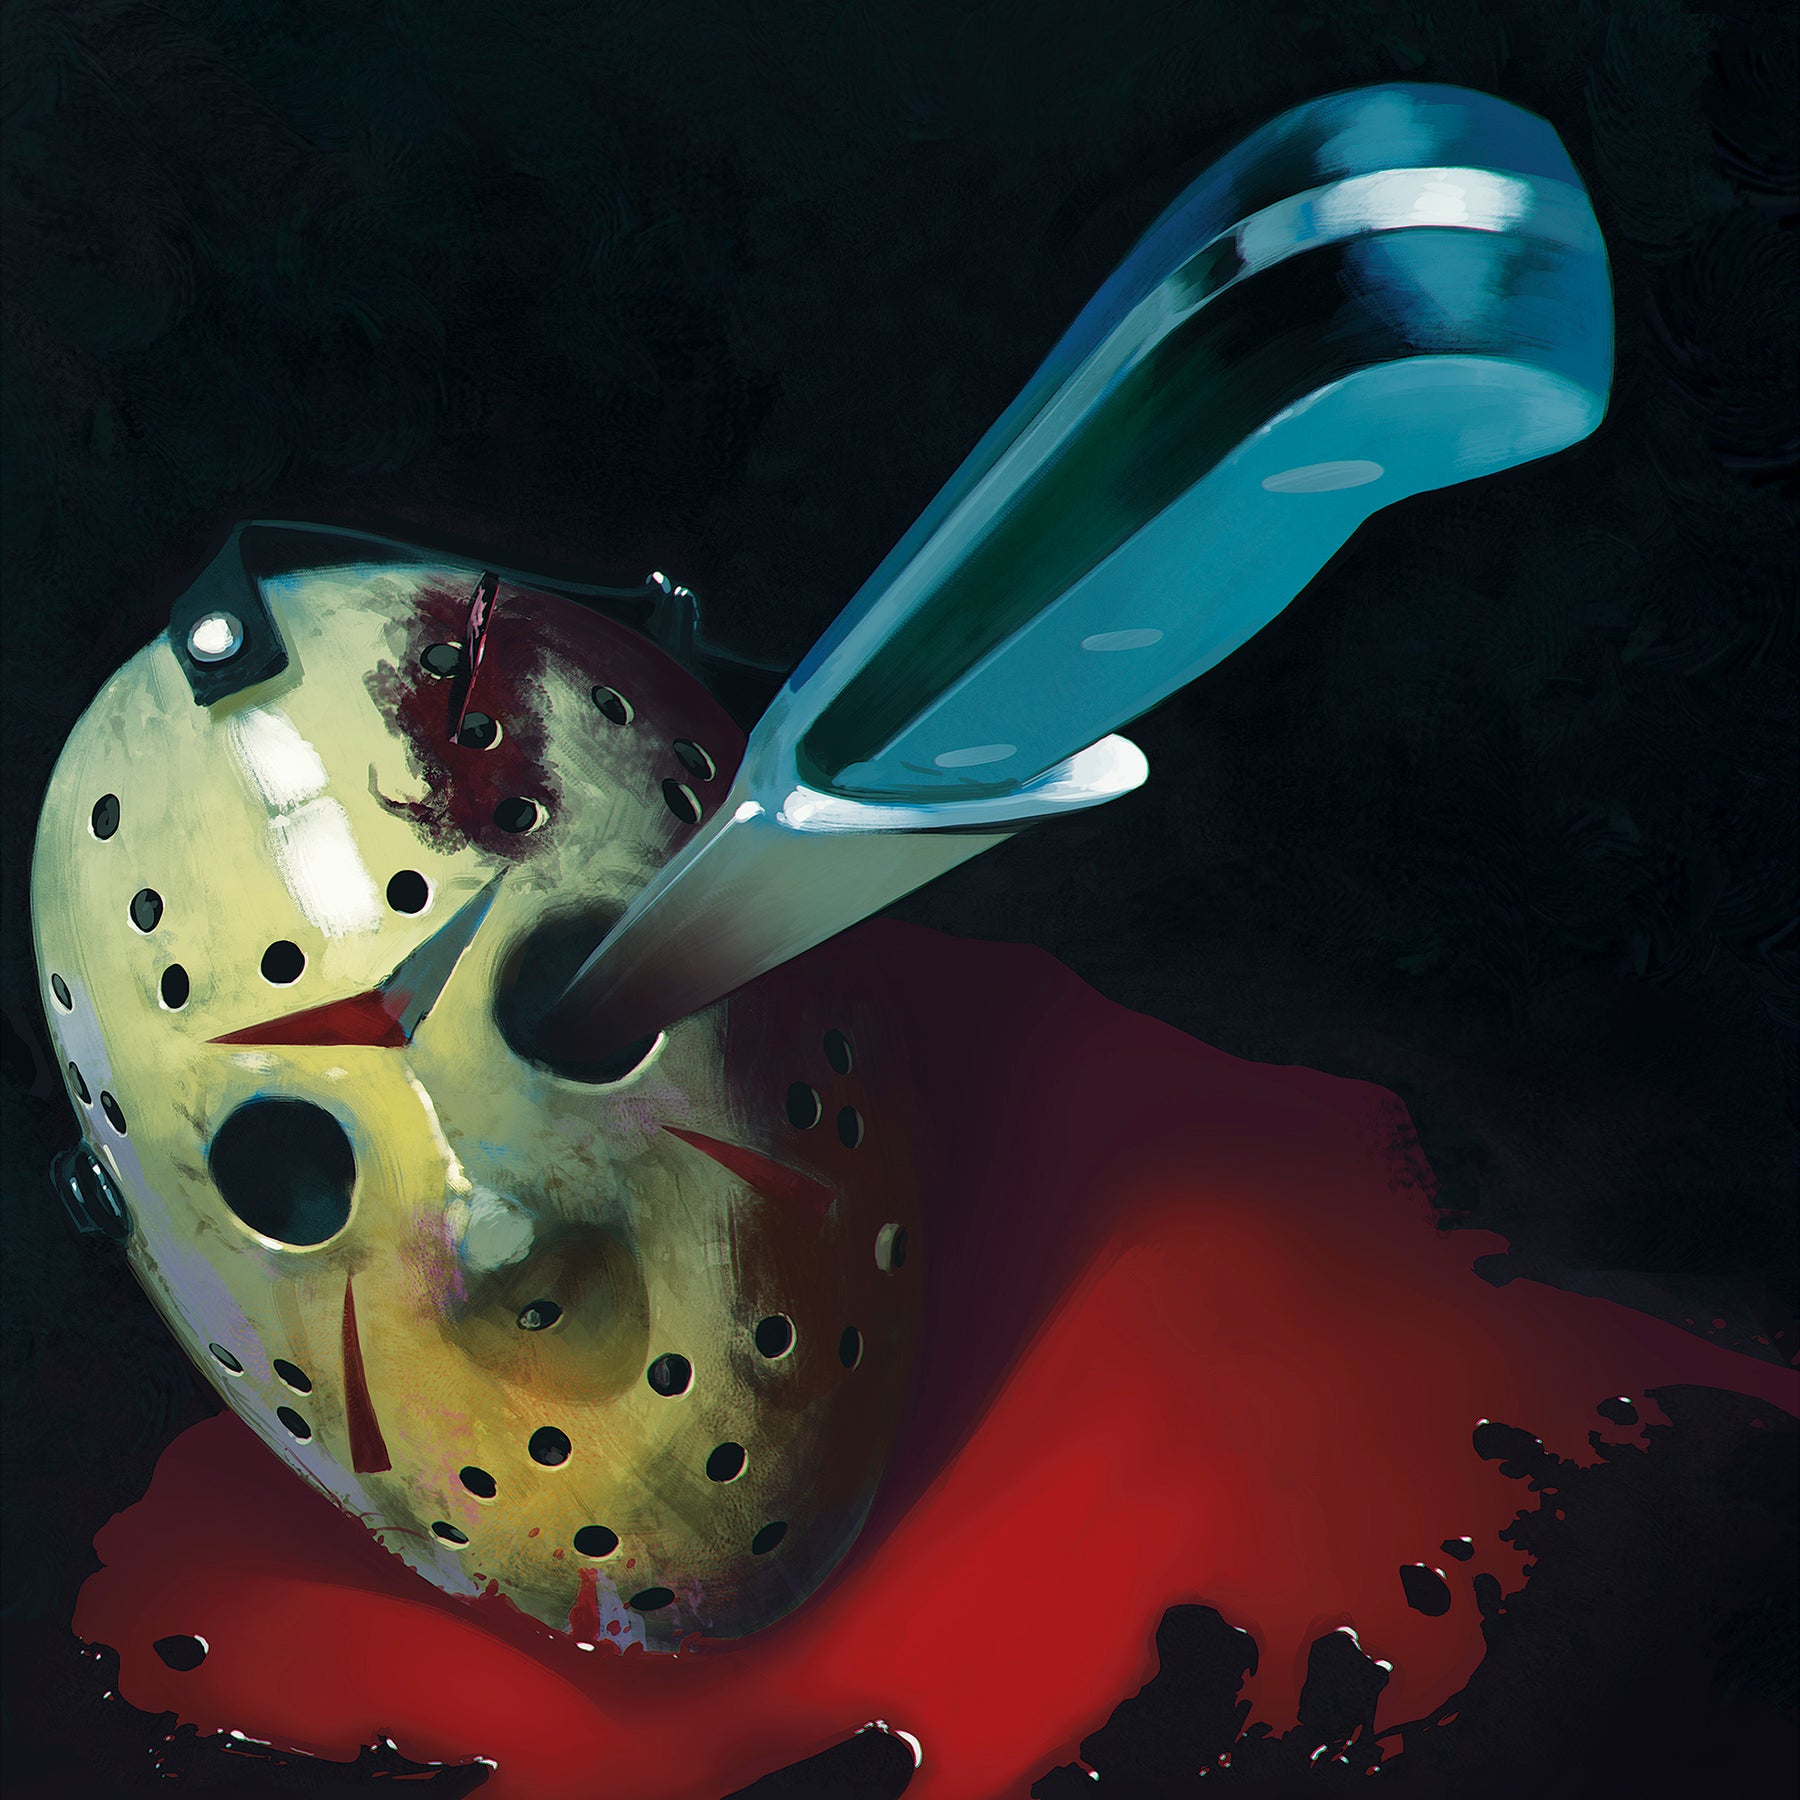 Friday The 13th – Waxwork Records